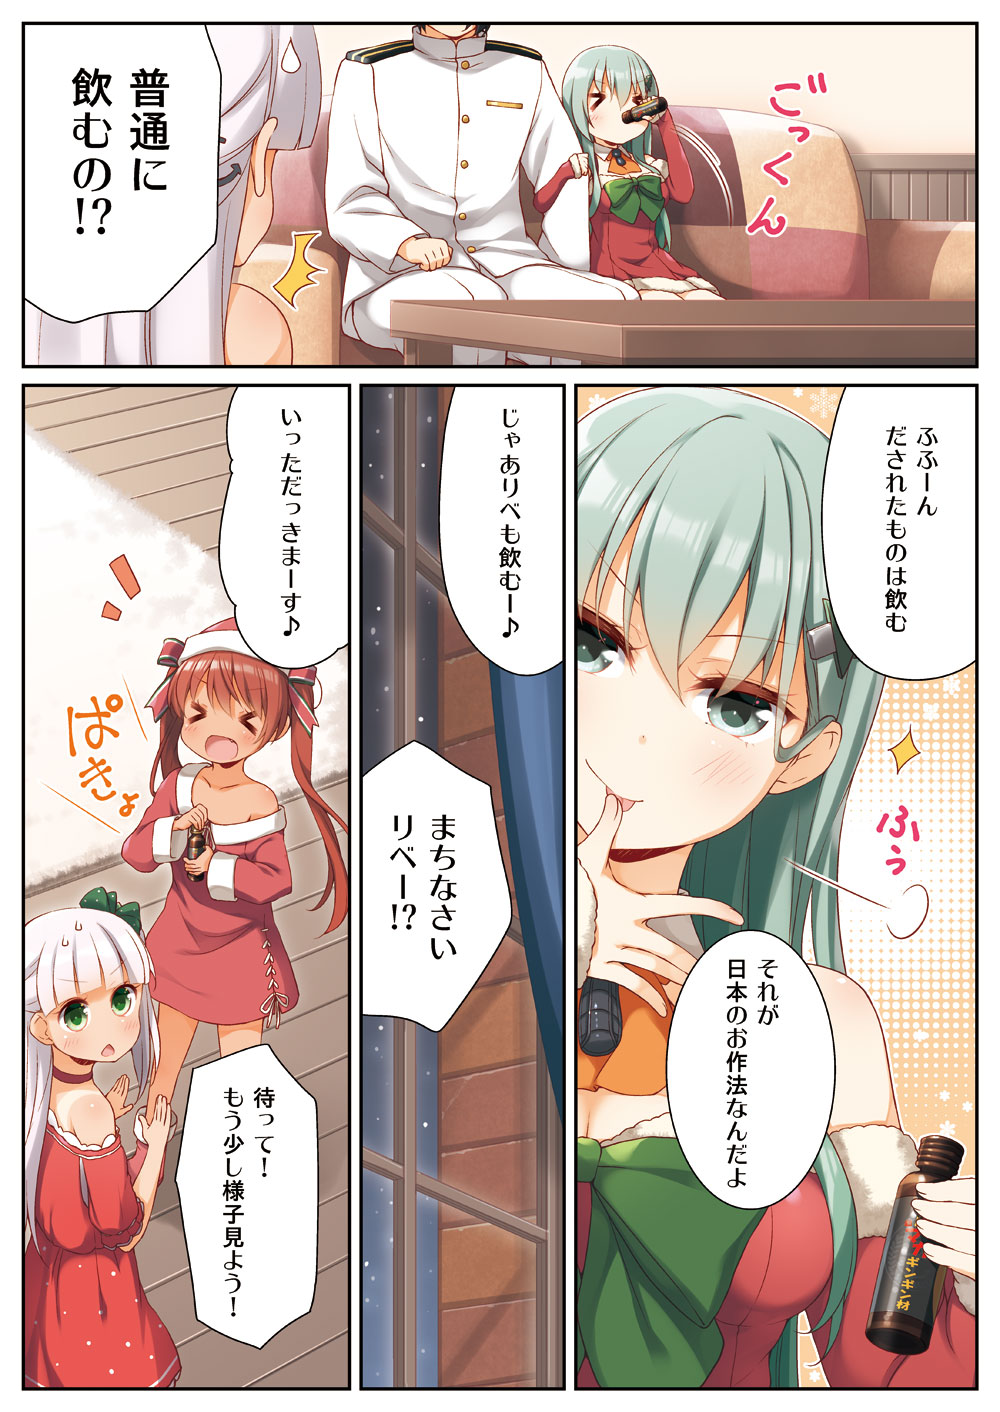 1boy 3girls admiral_(kantai_collection) aqua_eyes aqua_hair bangs blunt_bangs bottle brown_hair comic couch detached_sleeves dress fur-trimmed_dress green_eyes hair_ornament hair_ribbon hairclip hat highres holding holding_bottle indoors kantai_collection libeccio_(kantai_collection) long_hair long_sleeves maestrale_(kantai_collection) military military_uniform multiple_girls naval_uniform one_side_up red_dress ribbon santa_costume santa_dress santa_hat short_sleeves silver_hair sitting smile suzuya_(kantai_collection) table tan tanline translation_request twintails uniform wooden_floor yume_no_owari